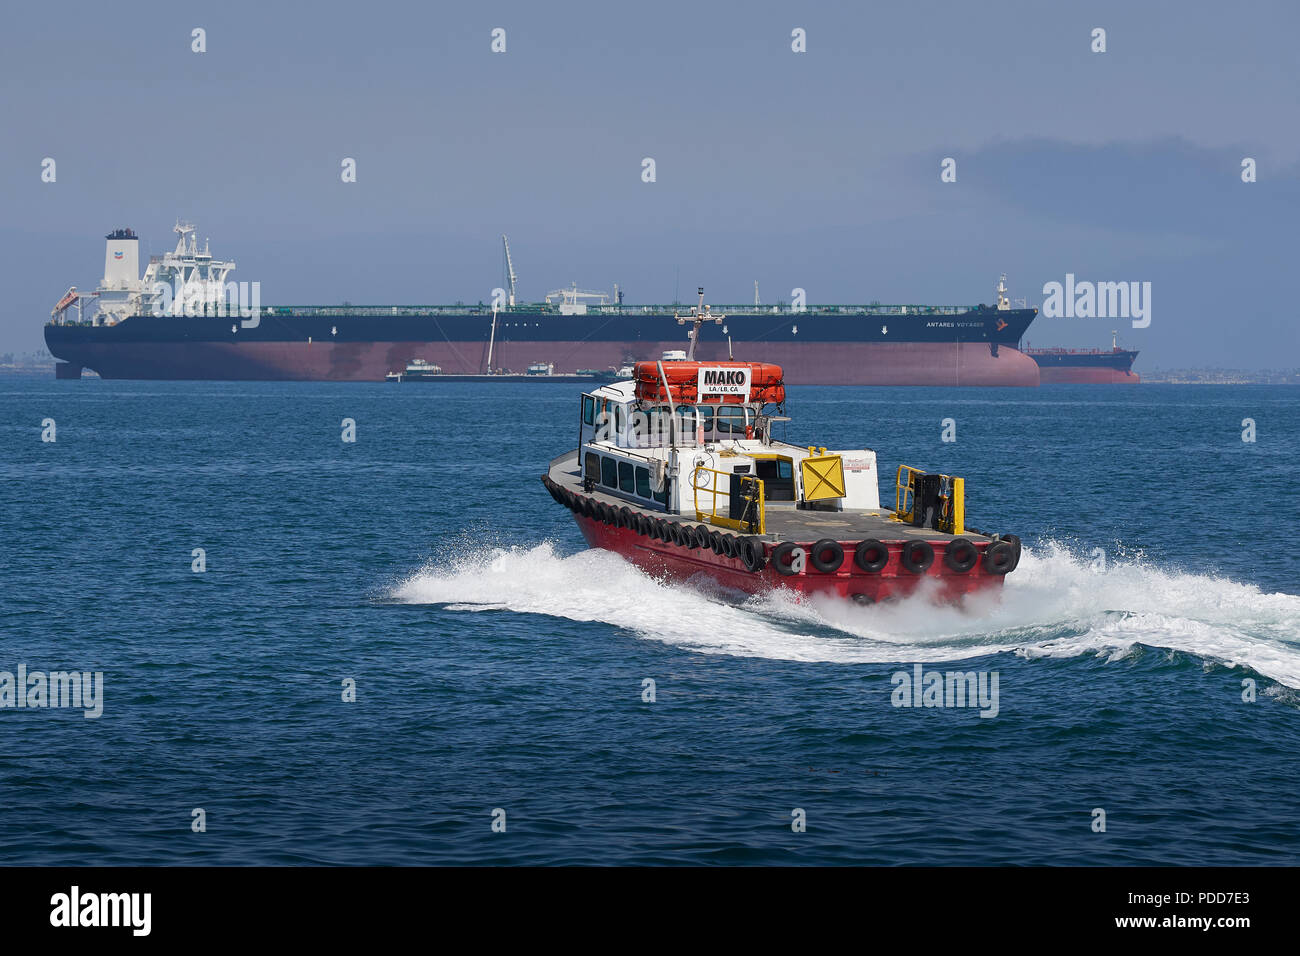 So Cal Ship Services Launch, MAKO, Underway In The Port Of Long Beach, The Giant Supertanker, ANTARES VOYAGER, Ahead, California, USA. Stock Photo